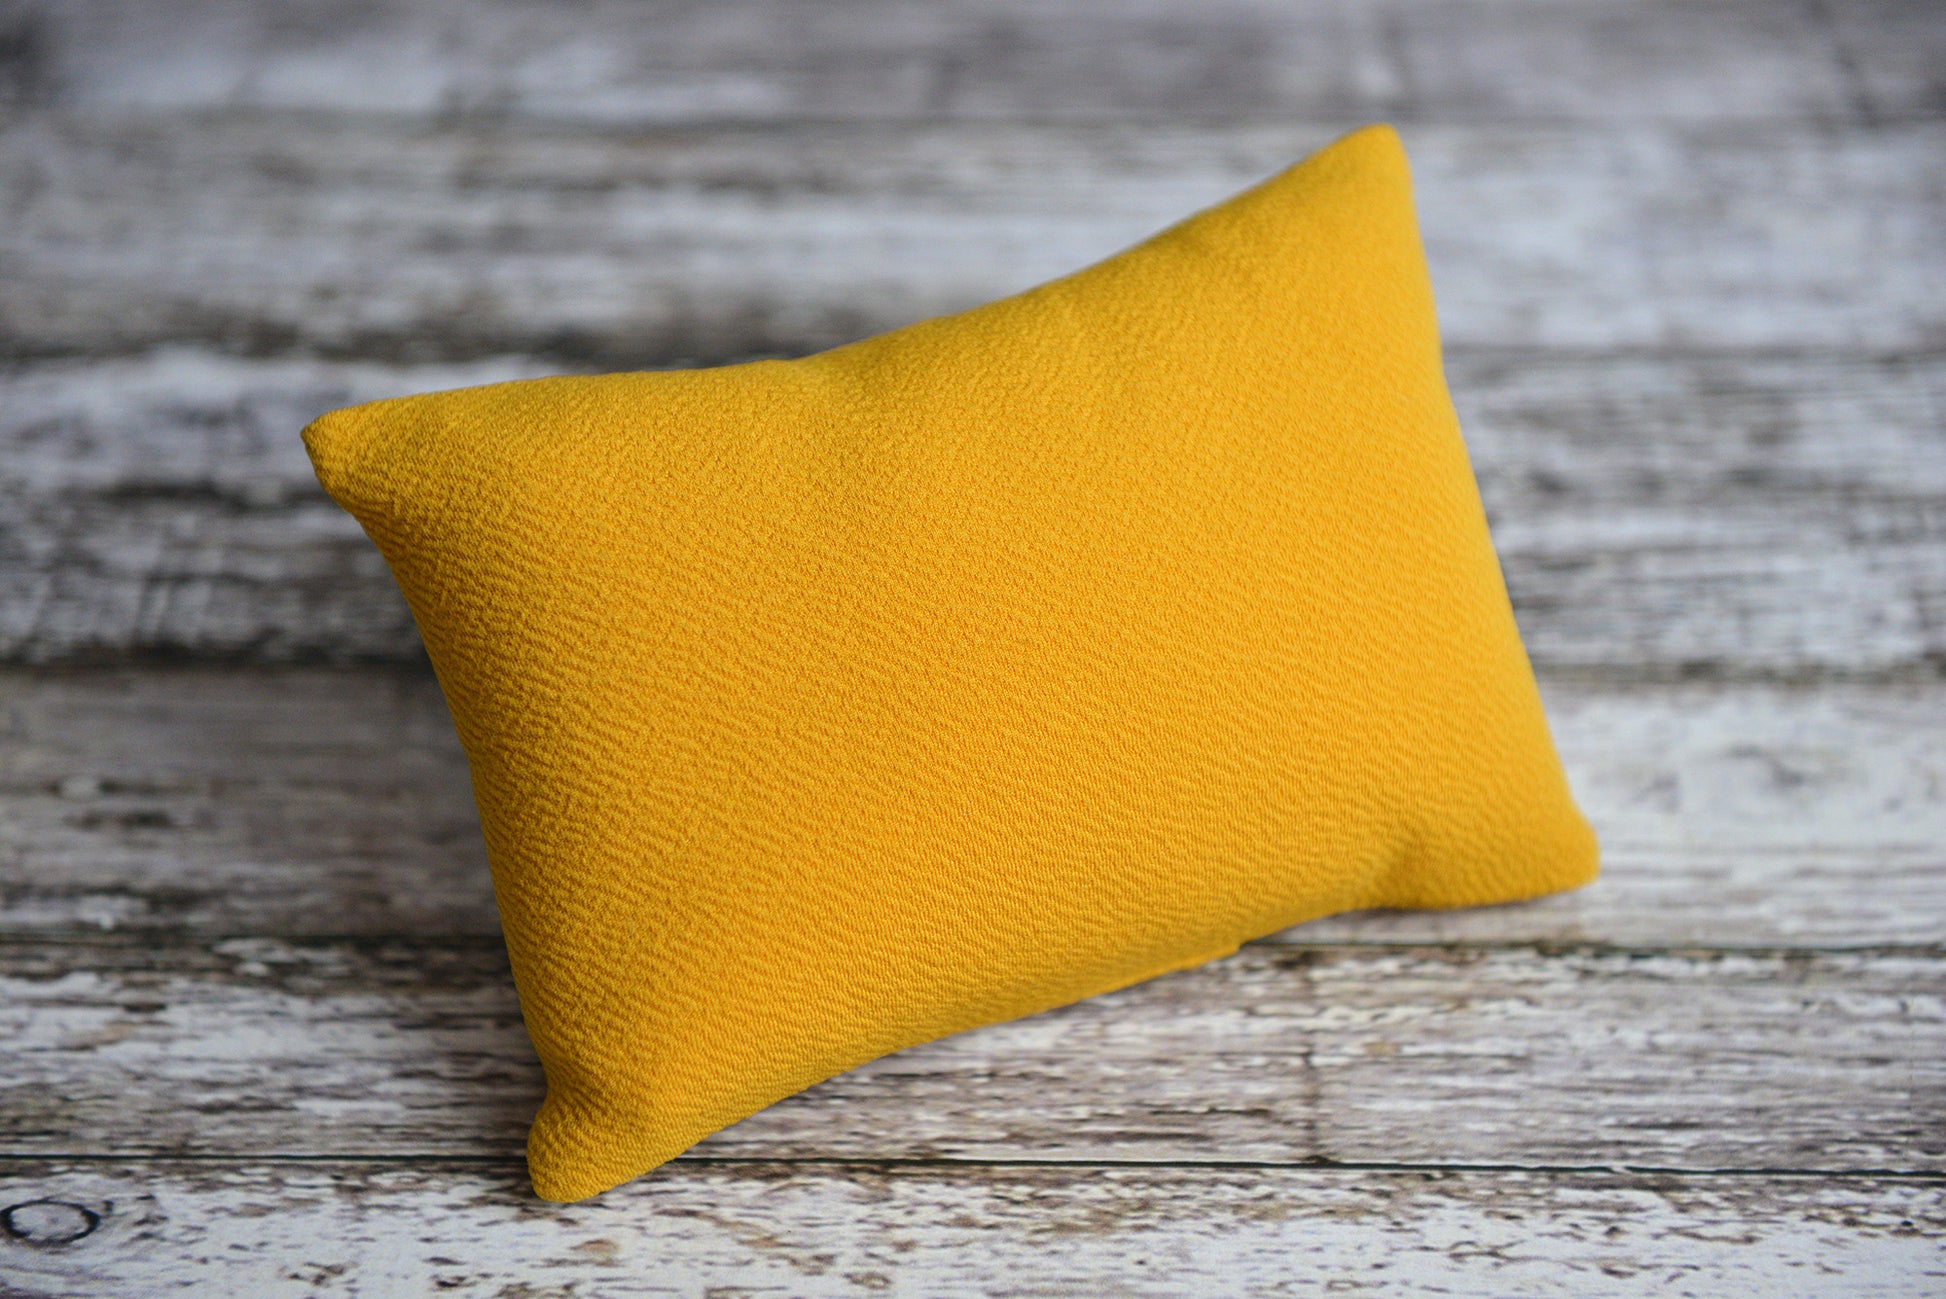 Mini Pillow with Cover - Textured - Mustard-Newborn Photography Props